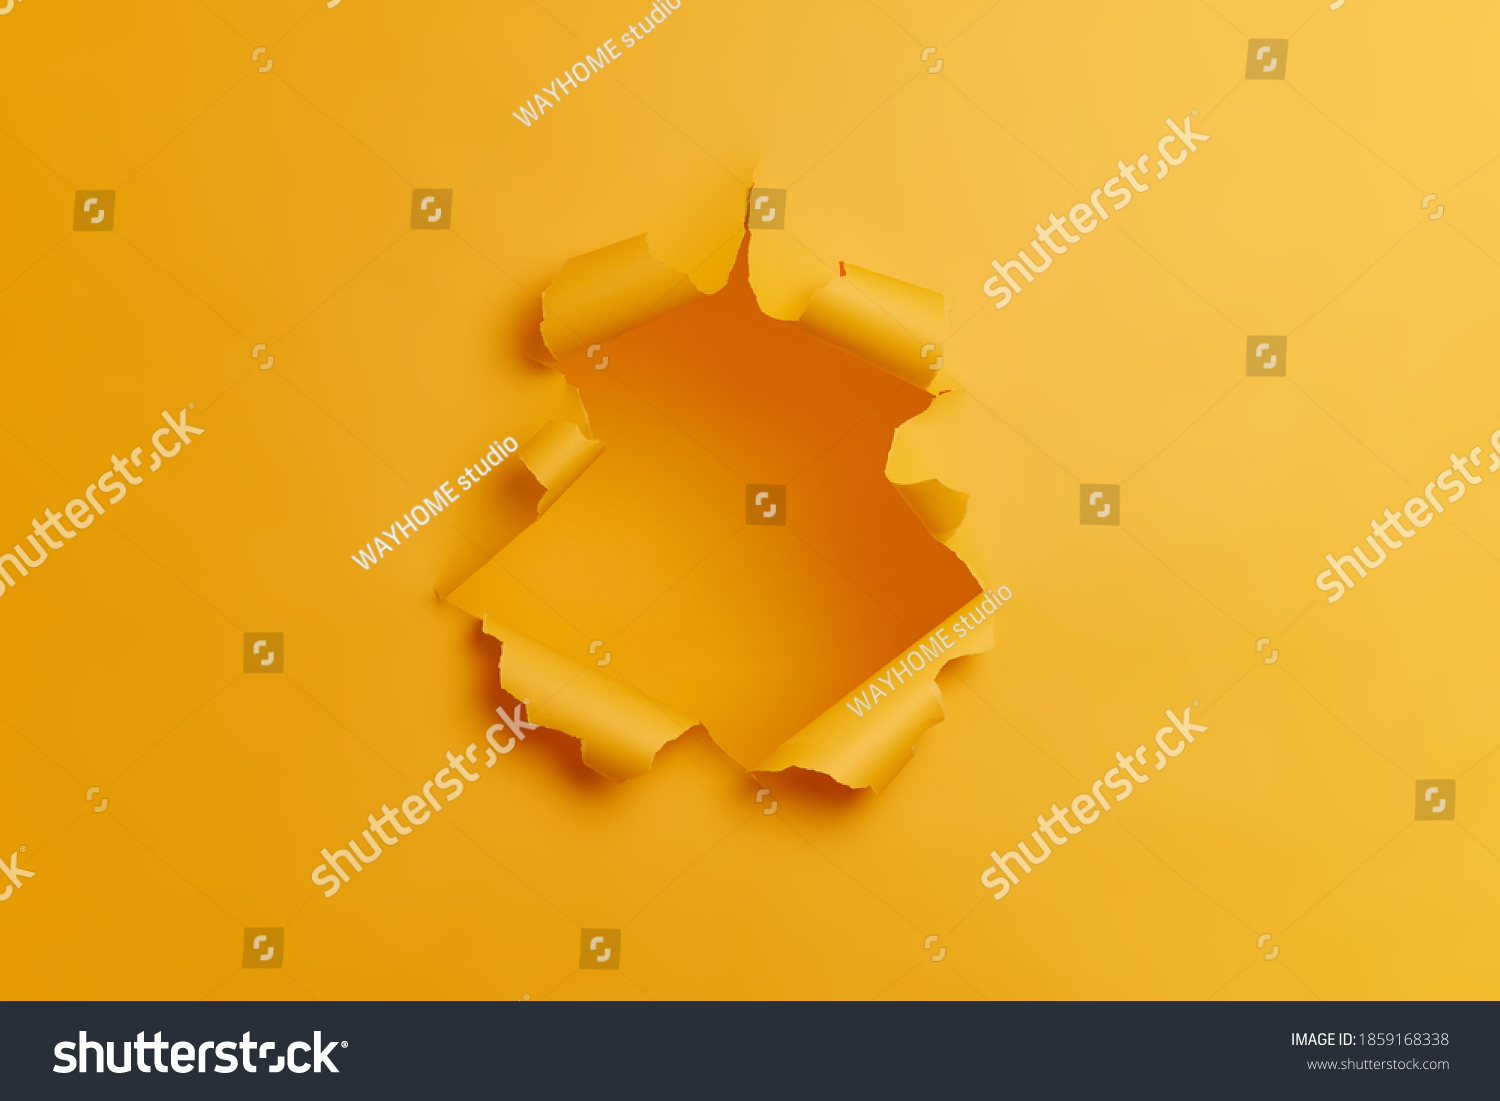 Big paper hole in center of yellow background. Blank space to insert your advertising content promotion or text information. Torn ripped studio wall. Breakthrough concept. No people in shot. #1859168338